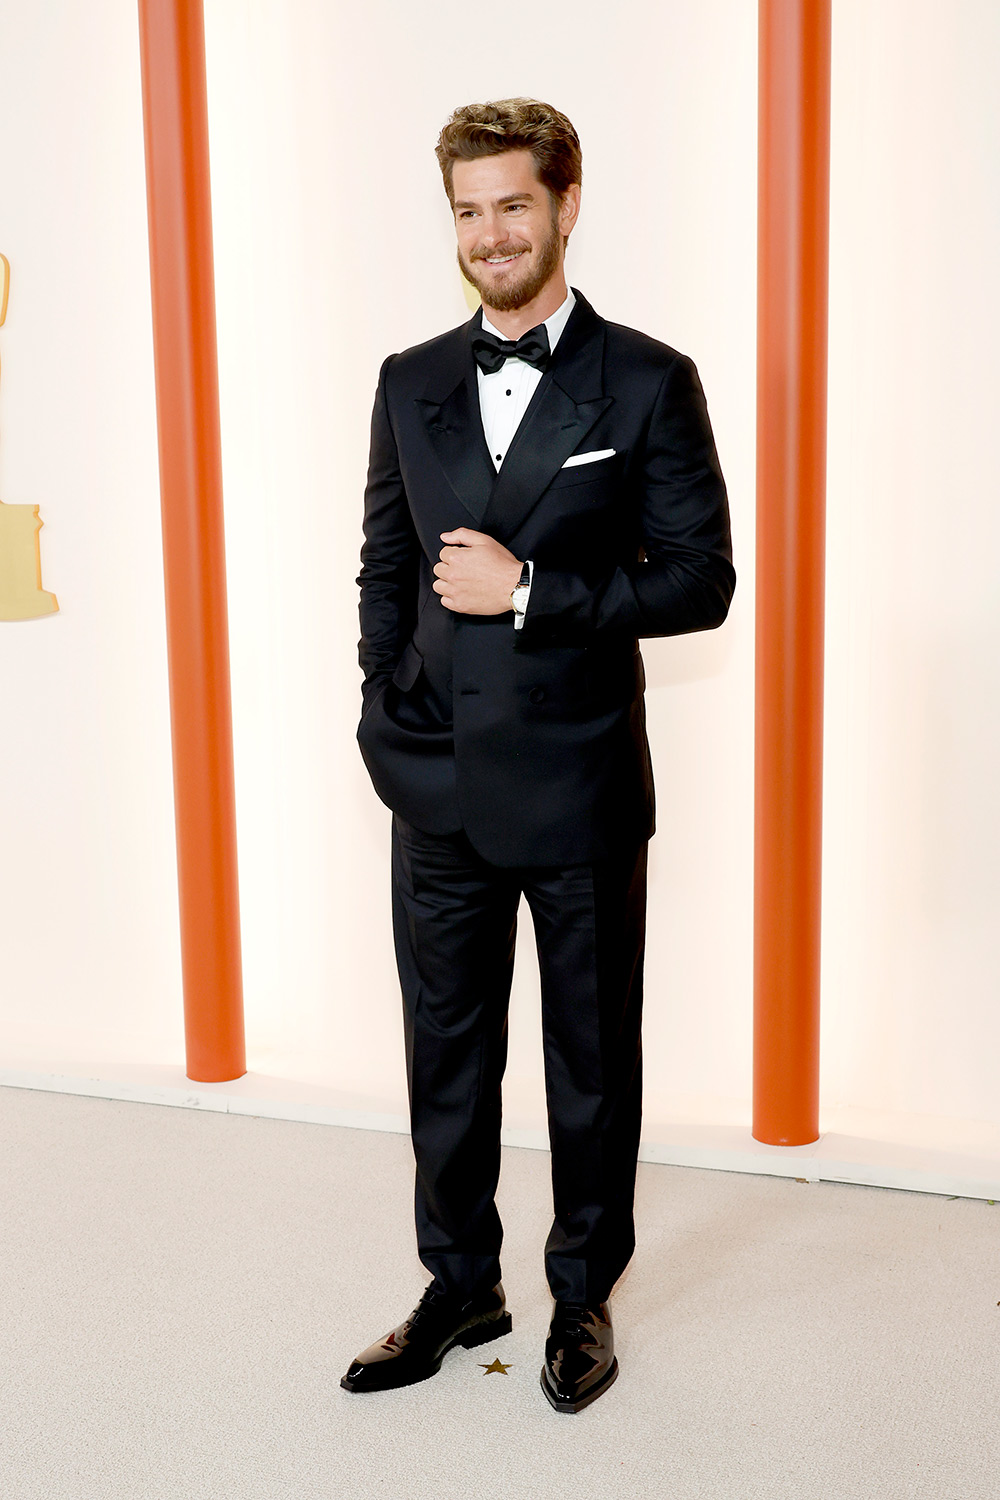 Andrew Garfield on the Oscars 2023 95th Academy Awards red carpet in Los Angeles